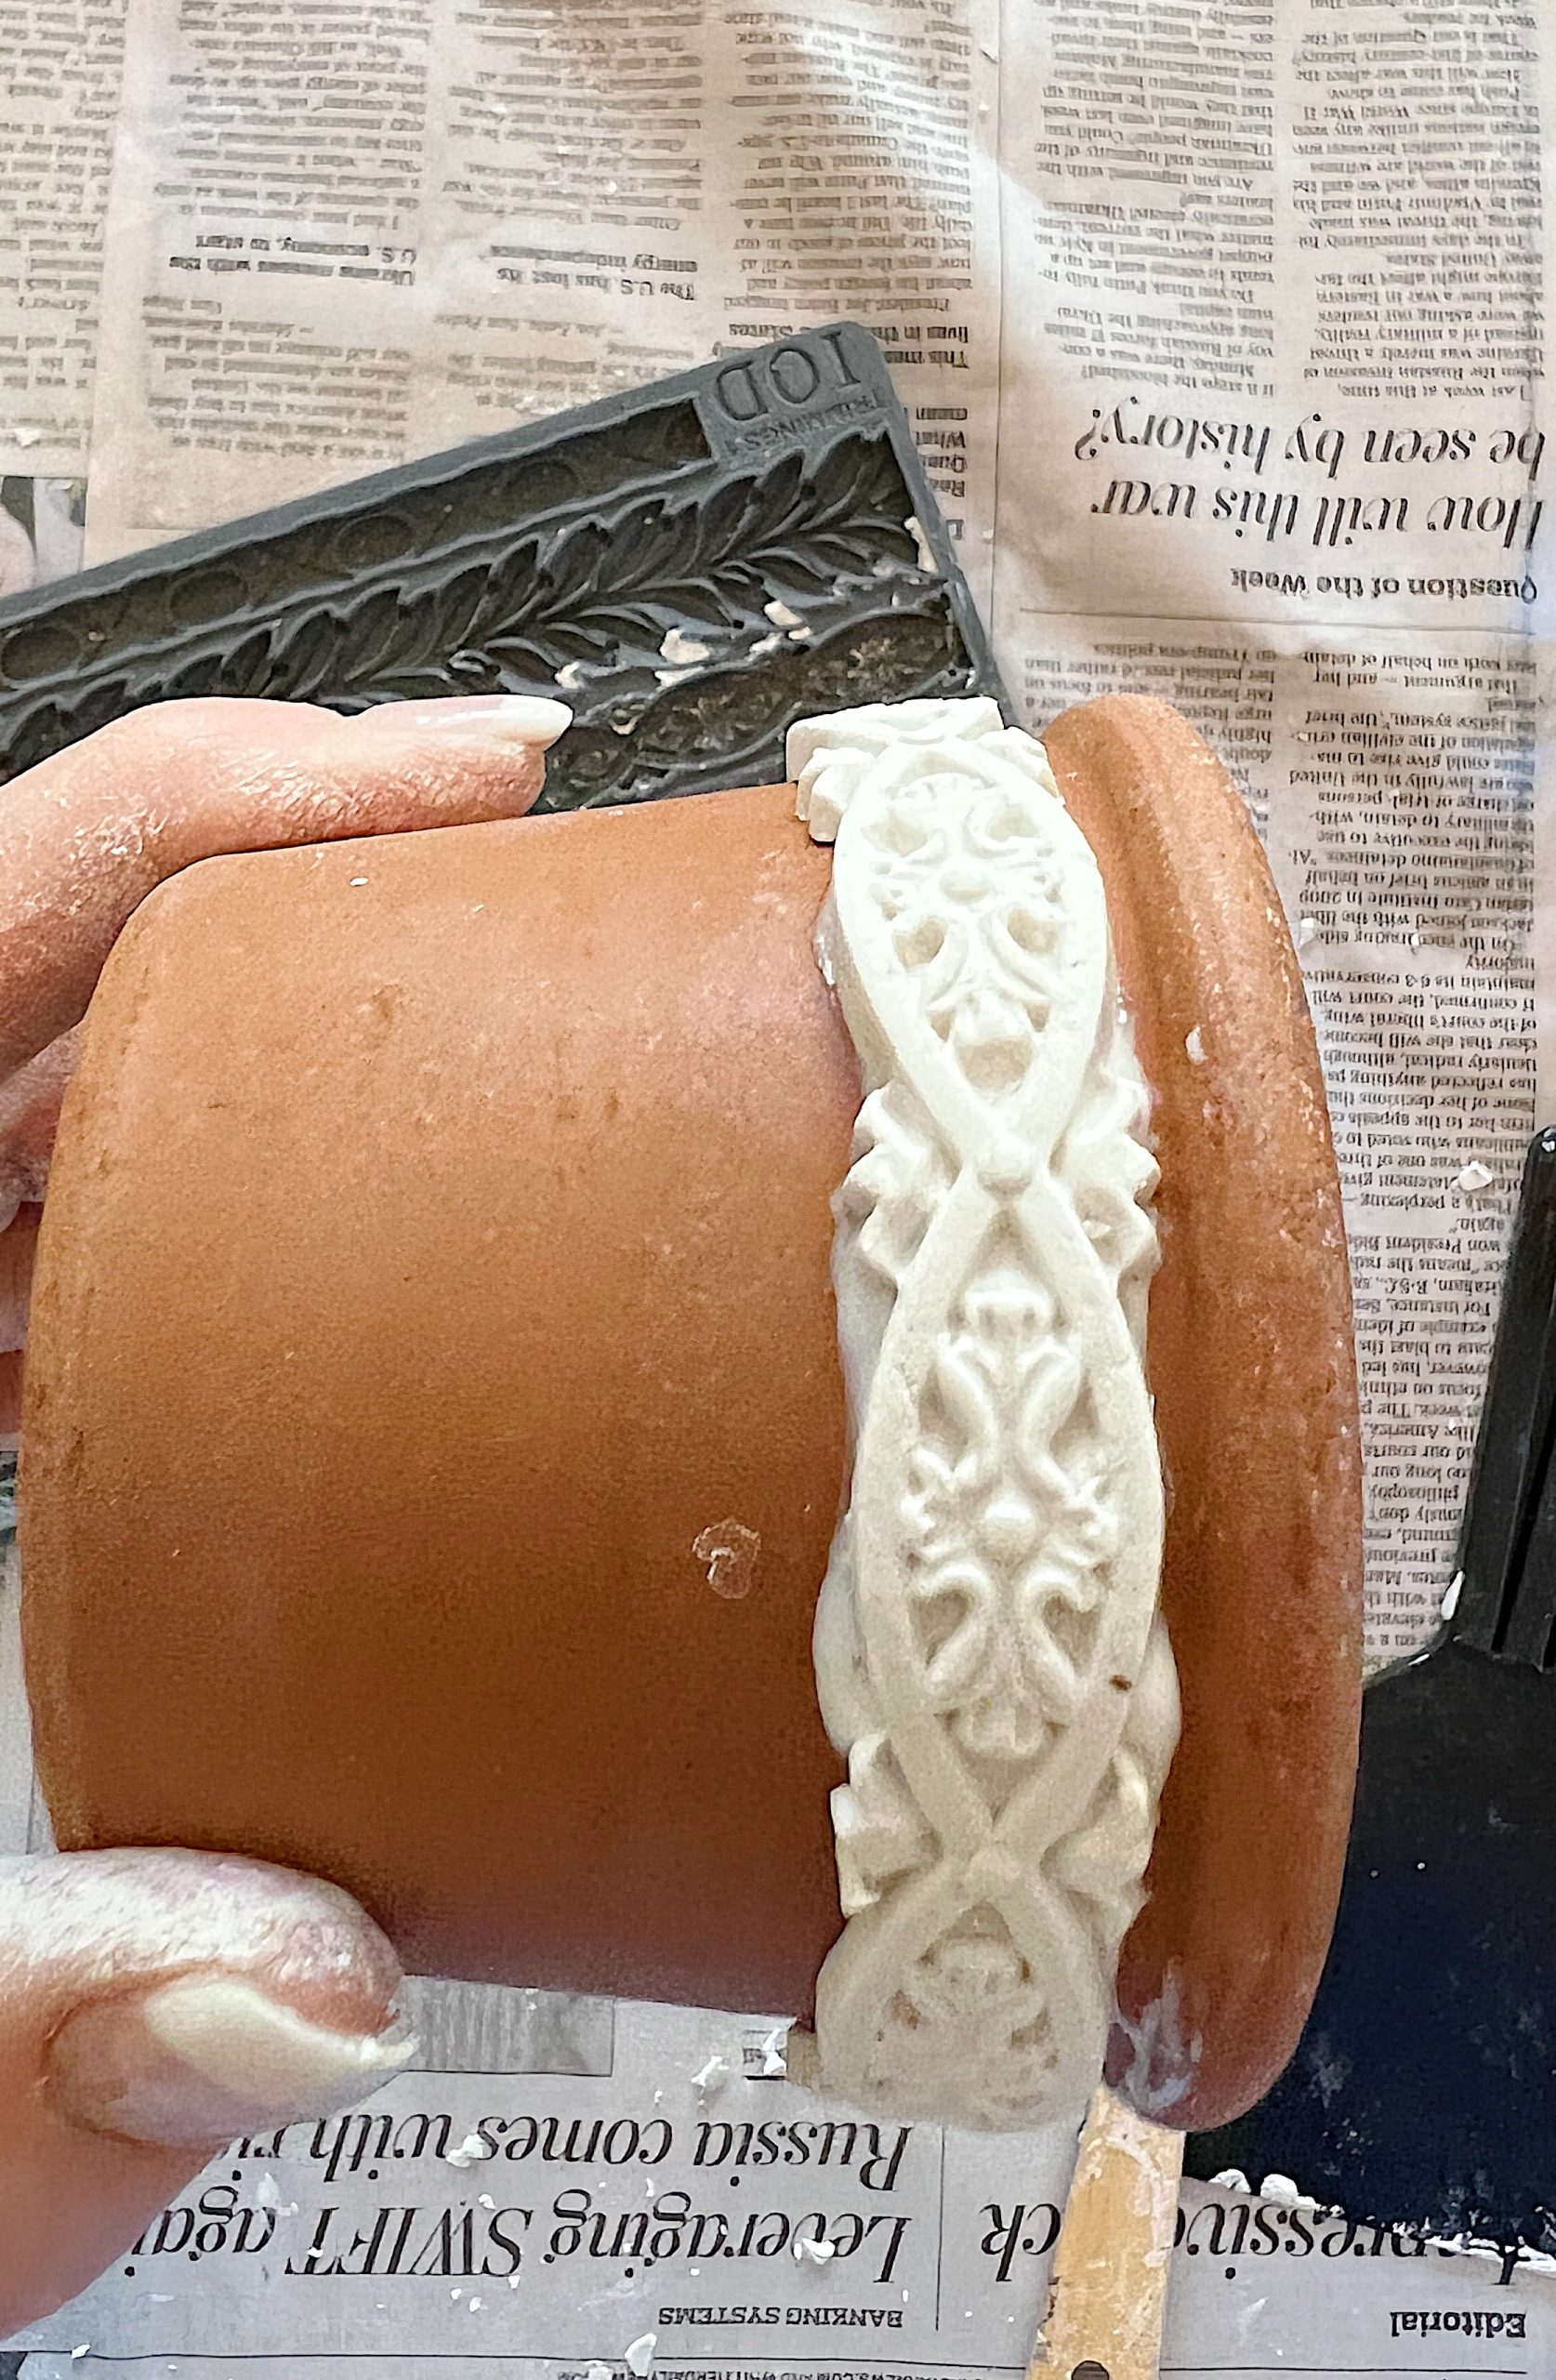 Glueing Clay onto the Terra Cotta Pots